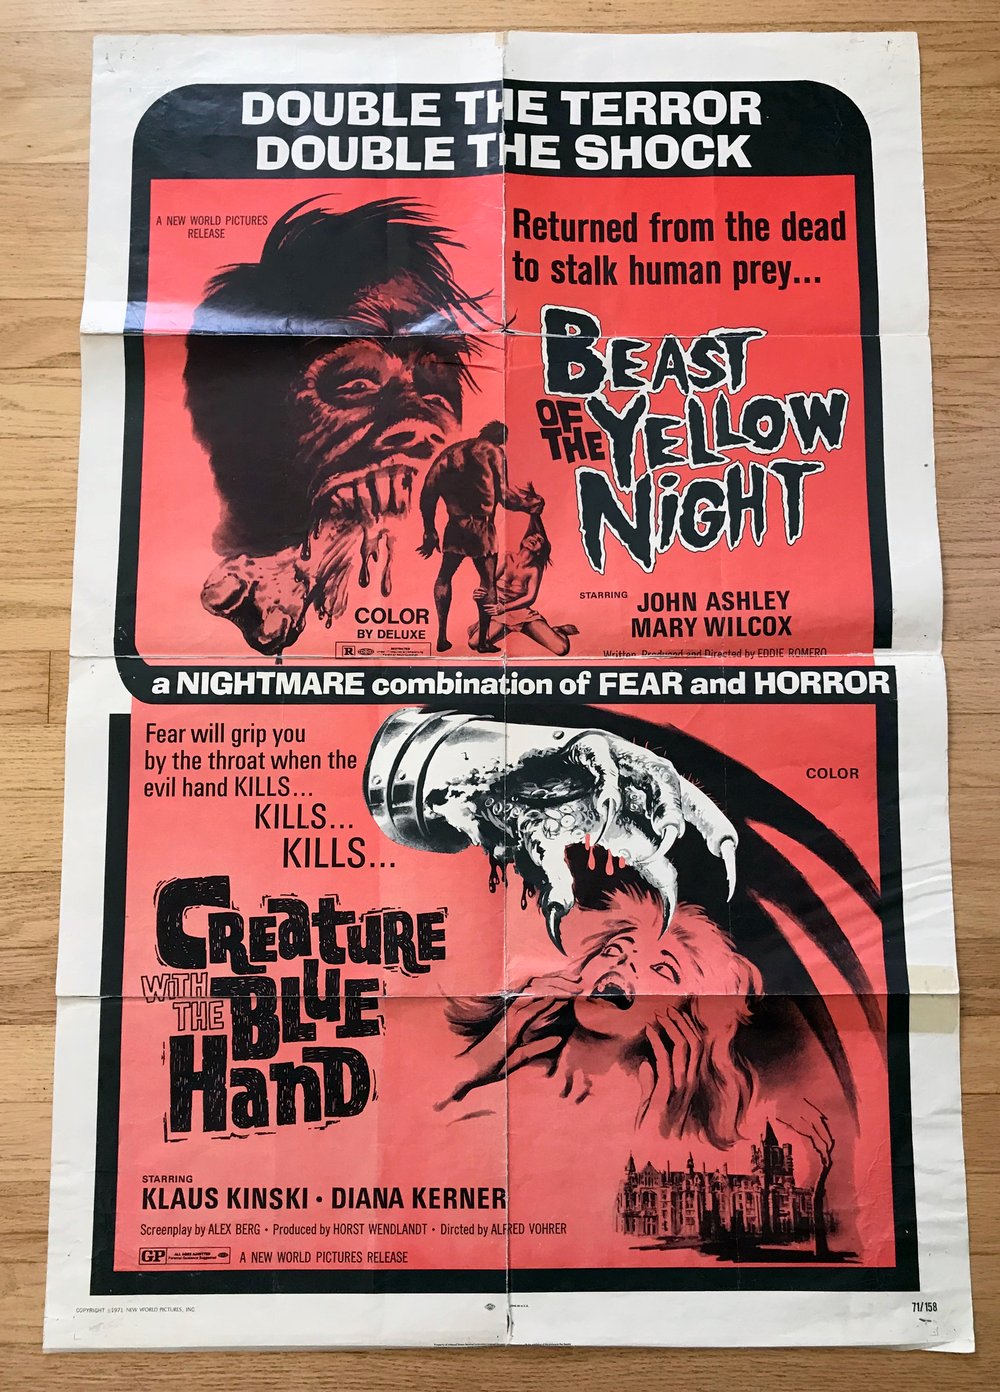 1971 BEAST OF THE YELLOW NIGHT/ CREATURE WITH THE BLUE HAND Original U.S. One Sheet Movie Poster